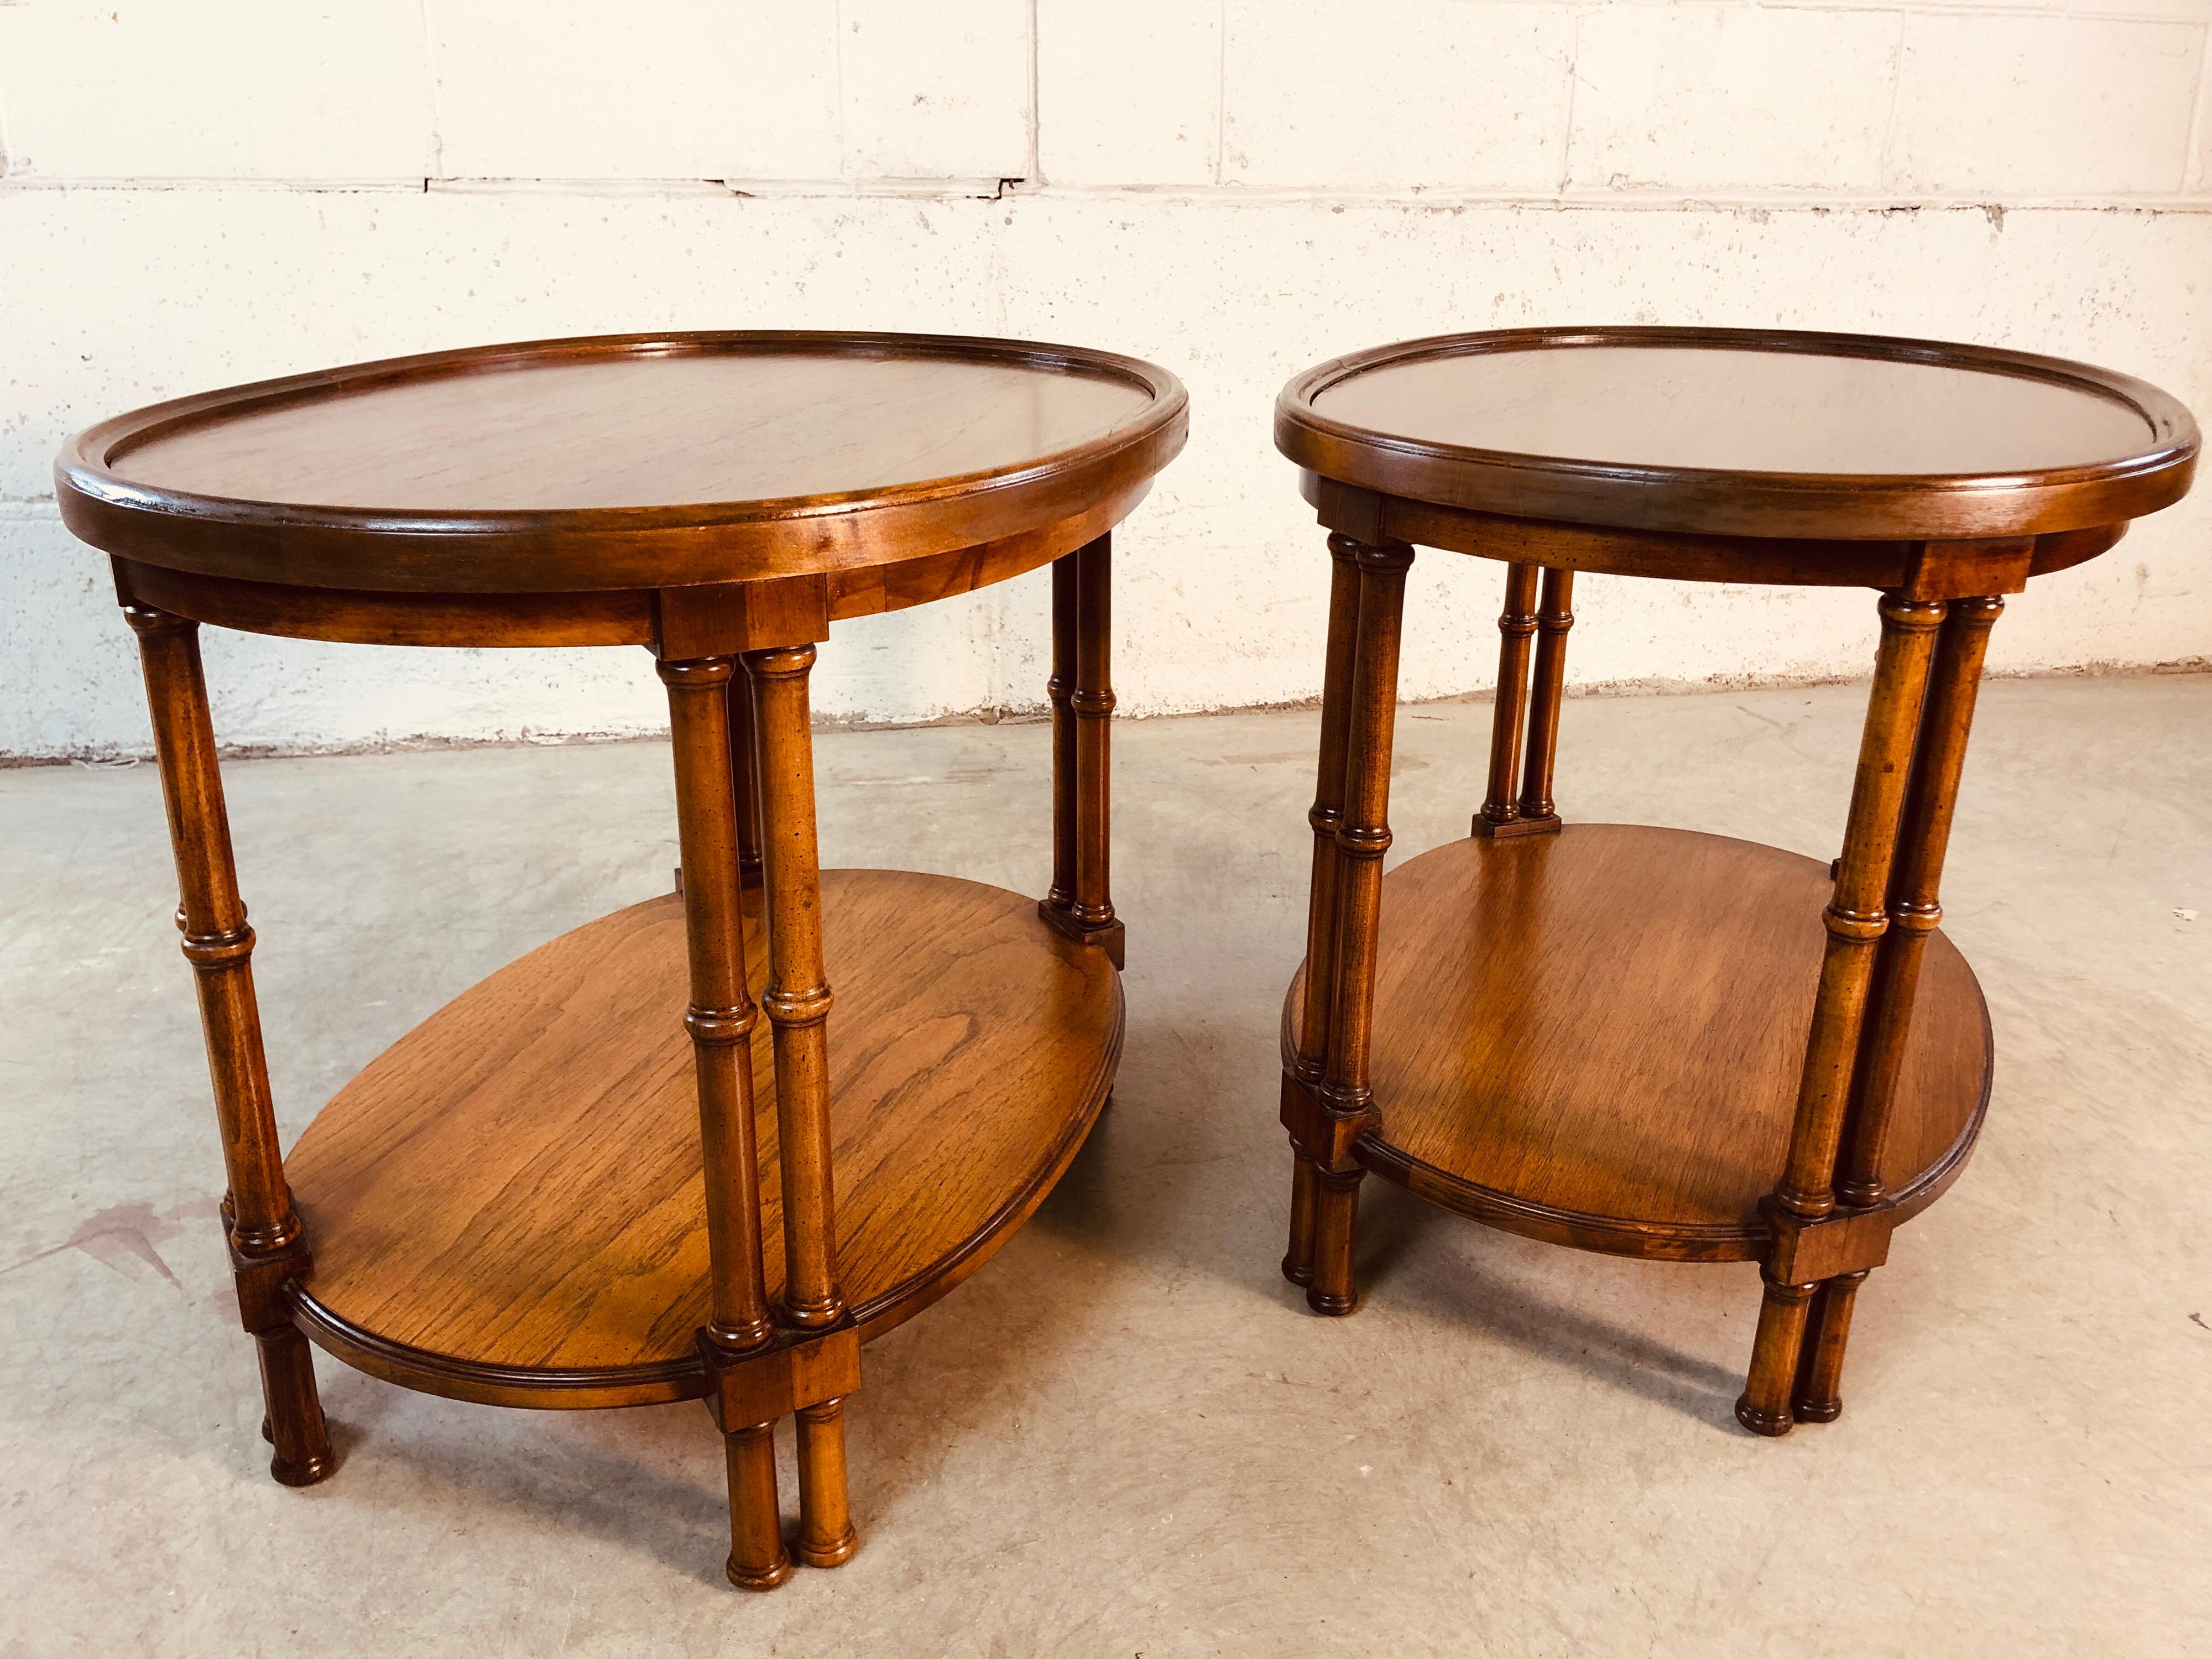 1960s Oval Mahogany Bamboo Style Brandt Furniture Side Tables, Pair For Sale 3